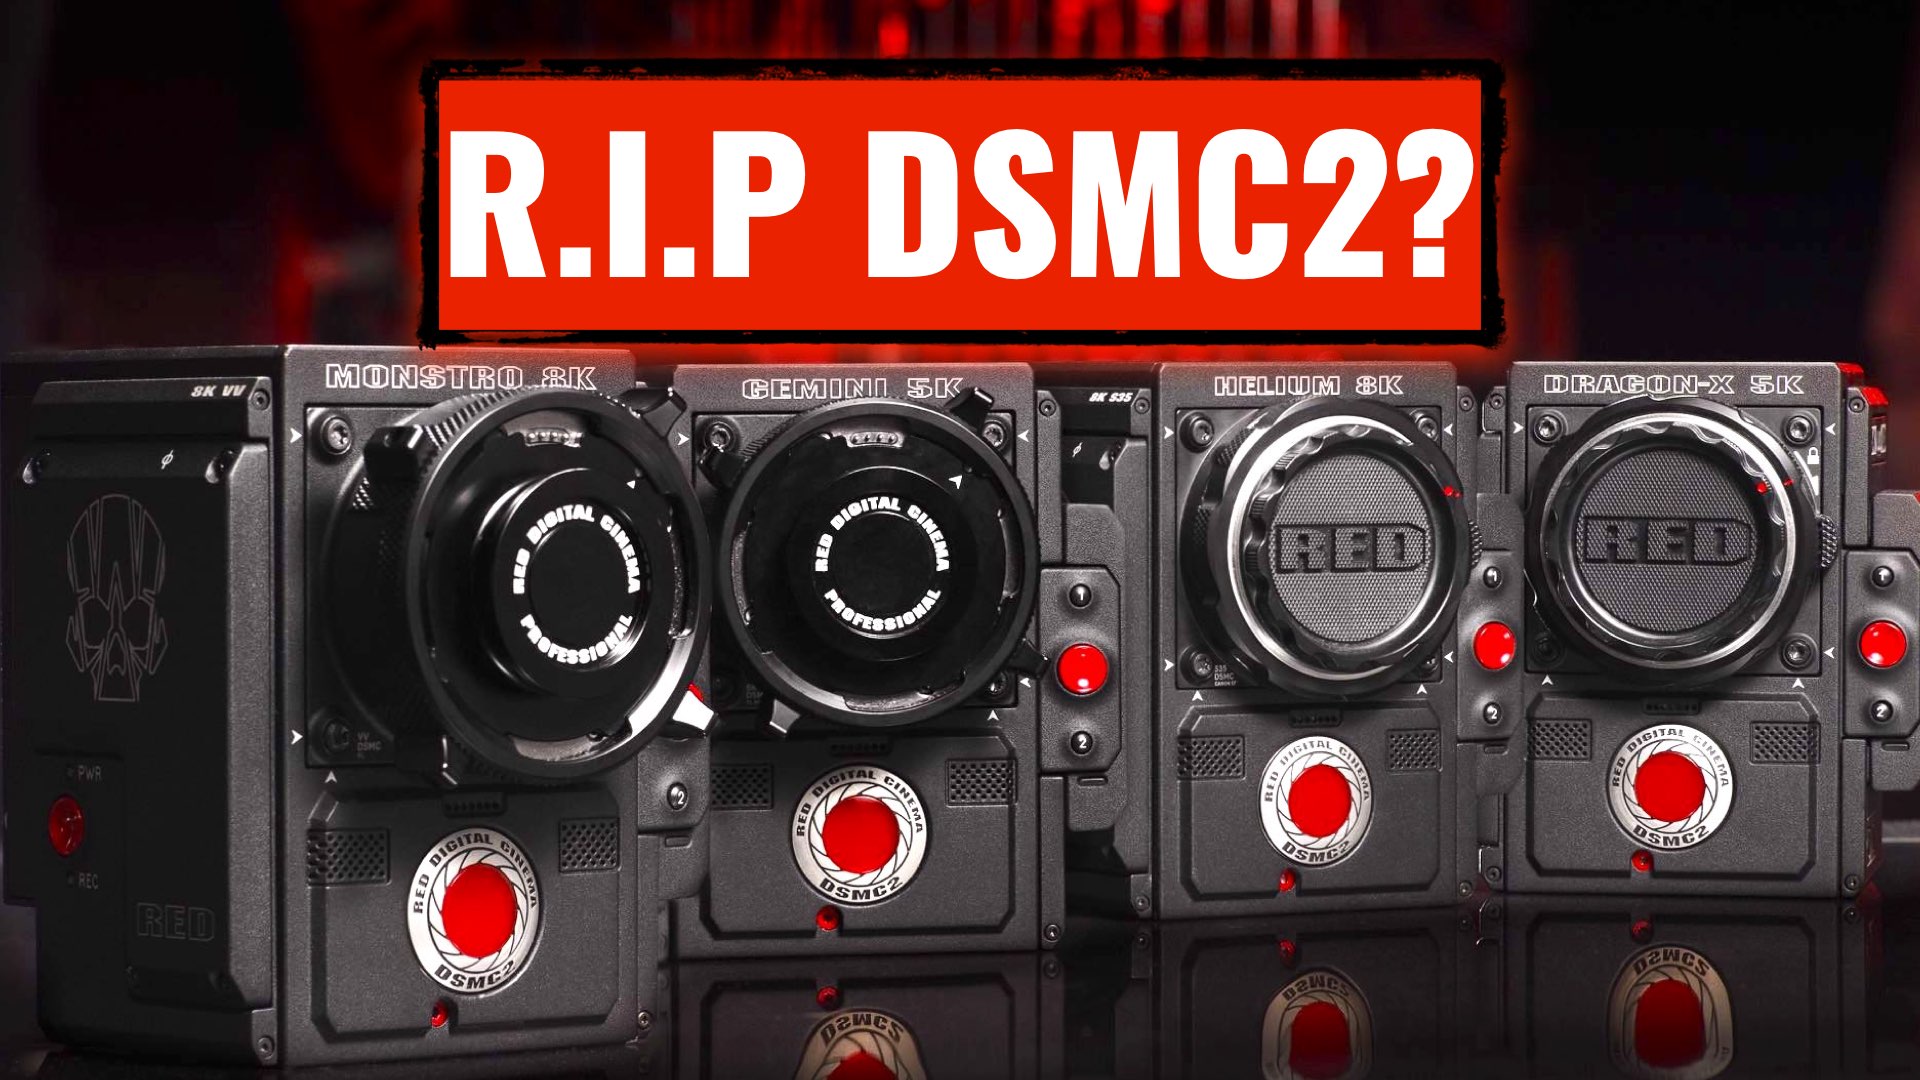 R.I.P DSMC2? RED Removes DSMC2 Bodies From its Store